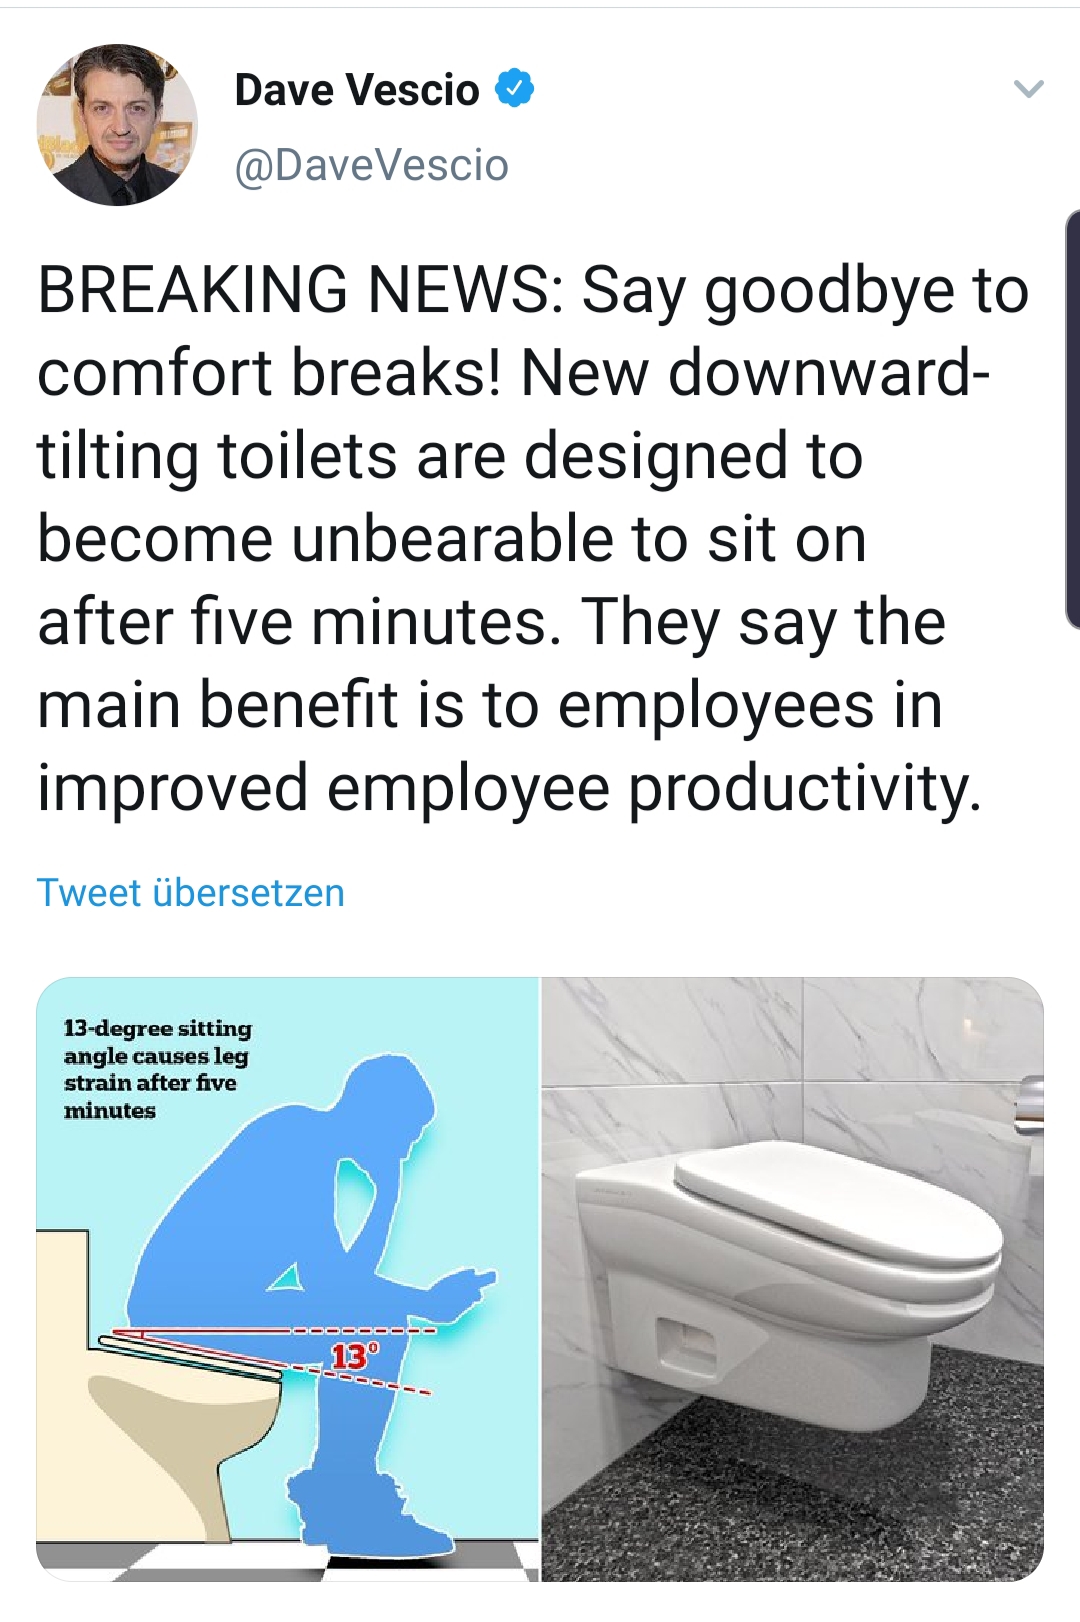 toilet seat - Da Dave Vescio Breaking News Say goodbye to comfort breaks! New downward tilting toilets are designed to become unbearable to sit on after five minutes. They say the main benefit is to employees in improved employee productivity. Tweet berse